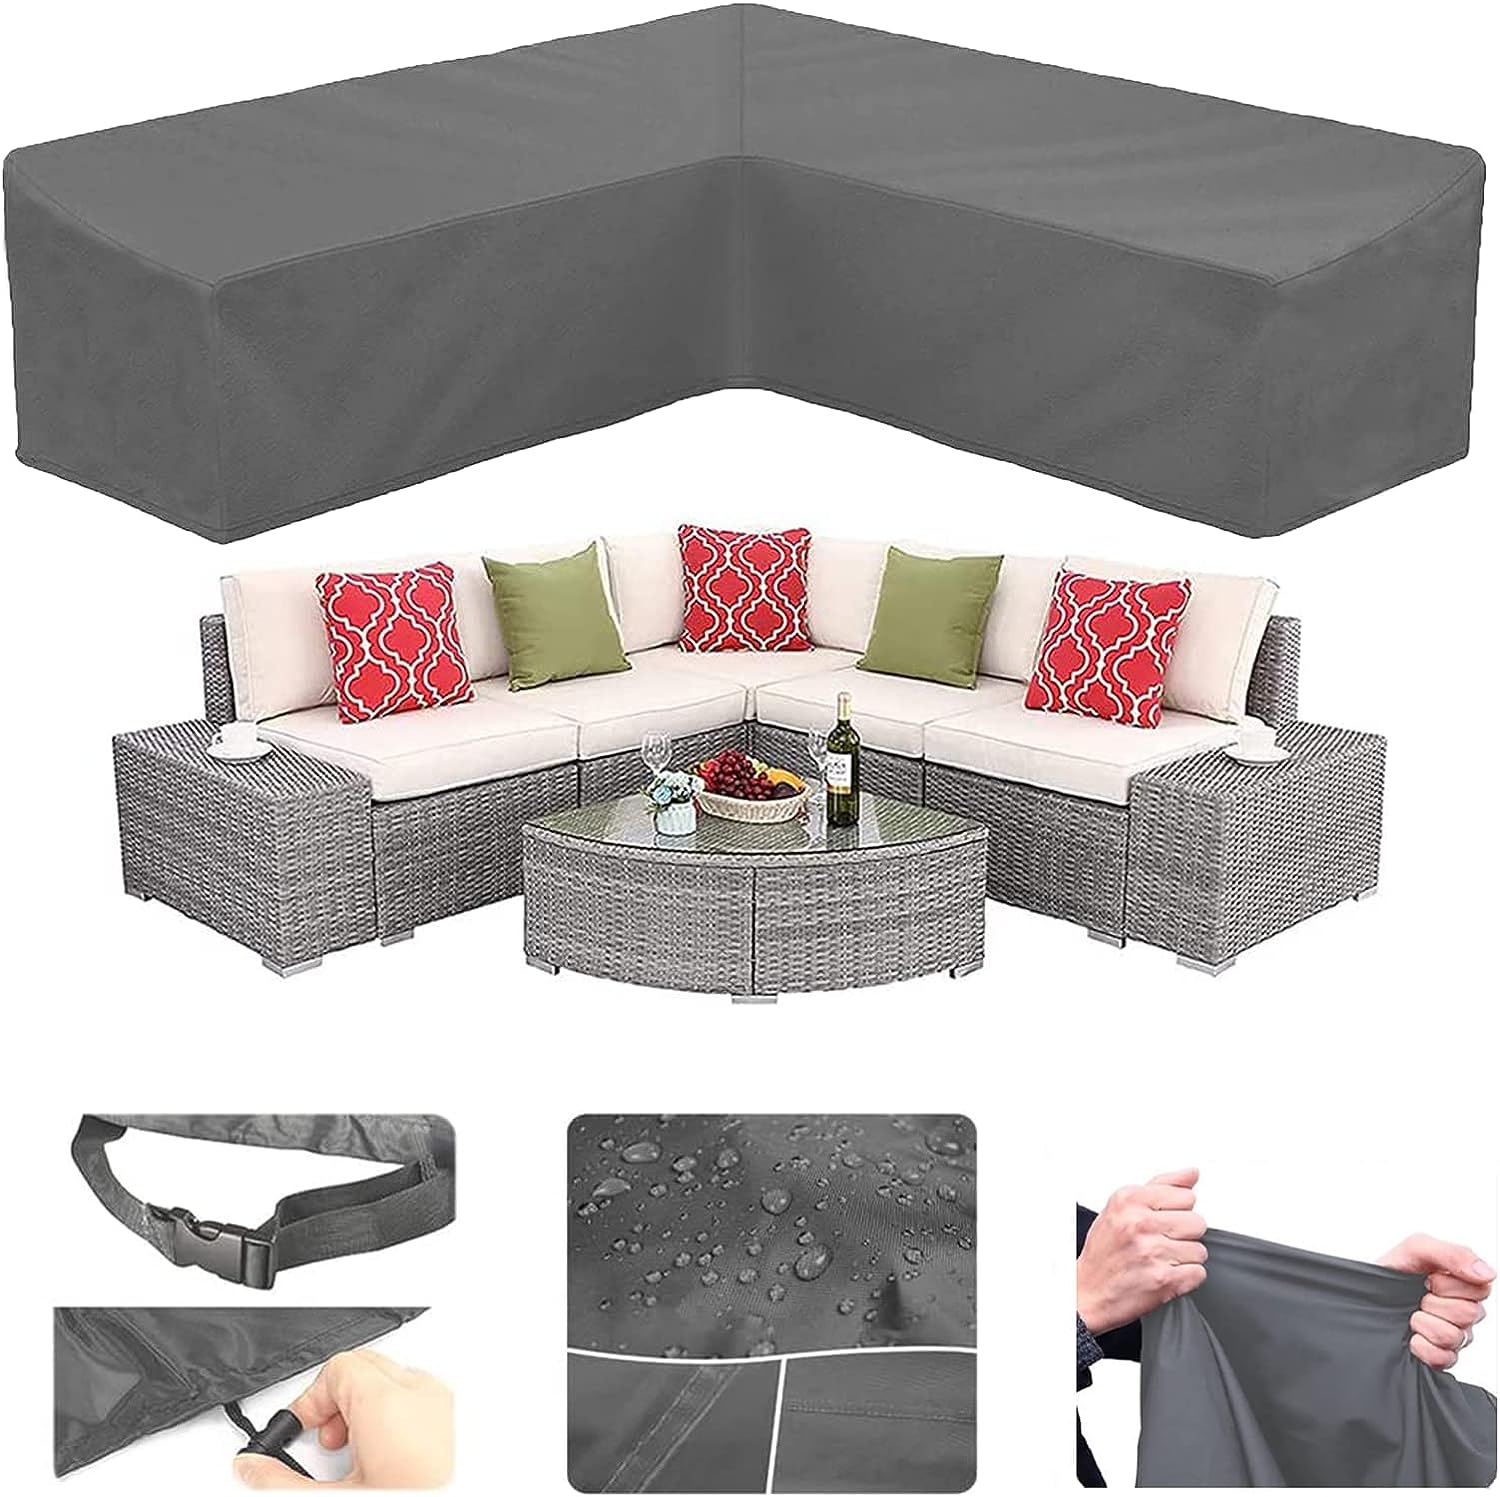 Orgrul V-Shape Garden Furniture Cover Waterproof,Windproof,outdoor Rattan Corner Sofa Cover with Waterproof Tape,heavy duty Oxford Fabric L Shaped Patio Sofa Cover Dustproof Anti-UV(255*255cm)-Grey